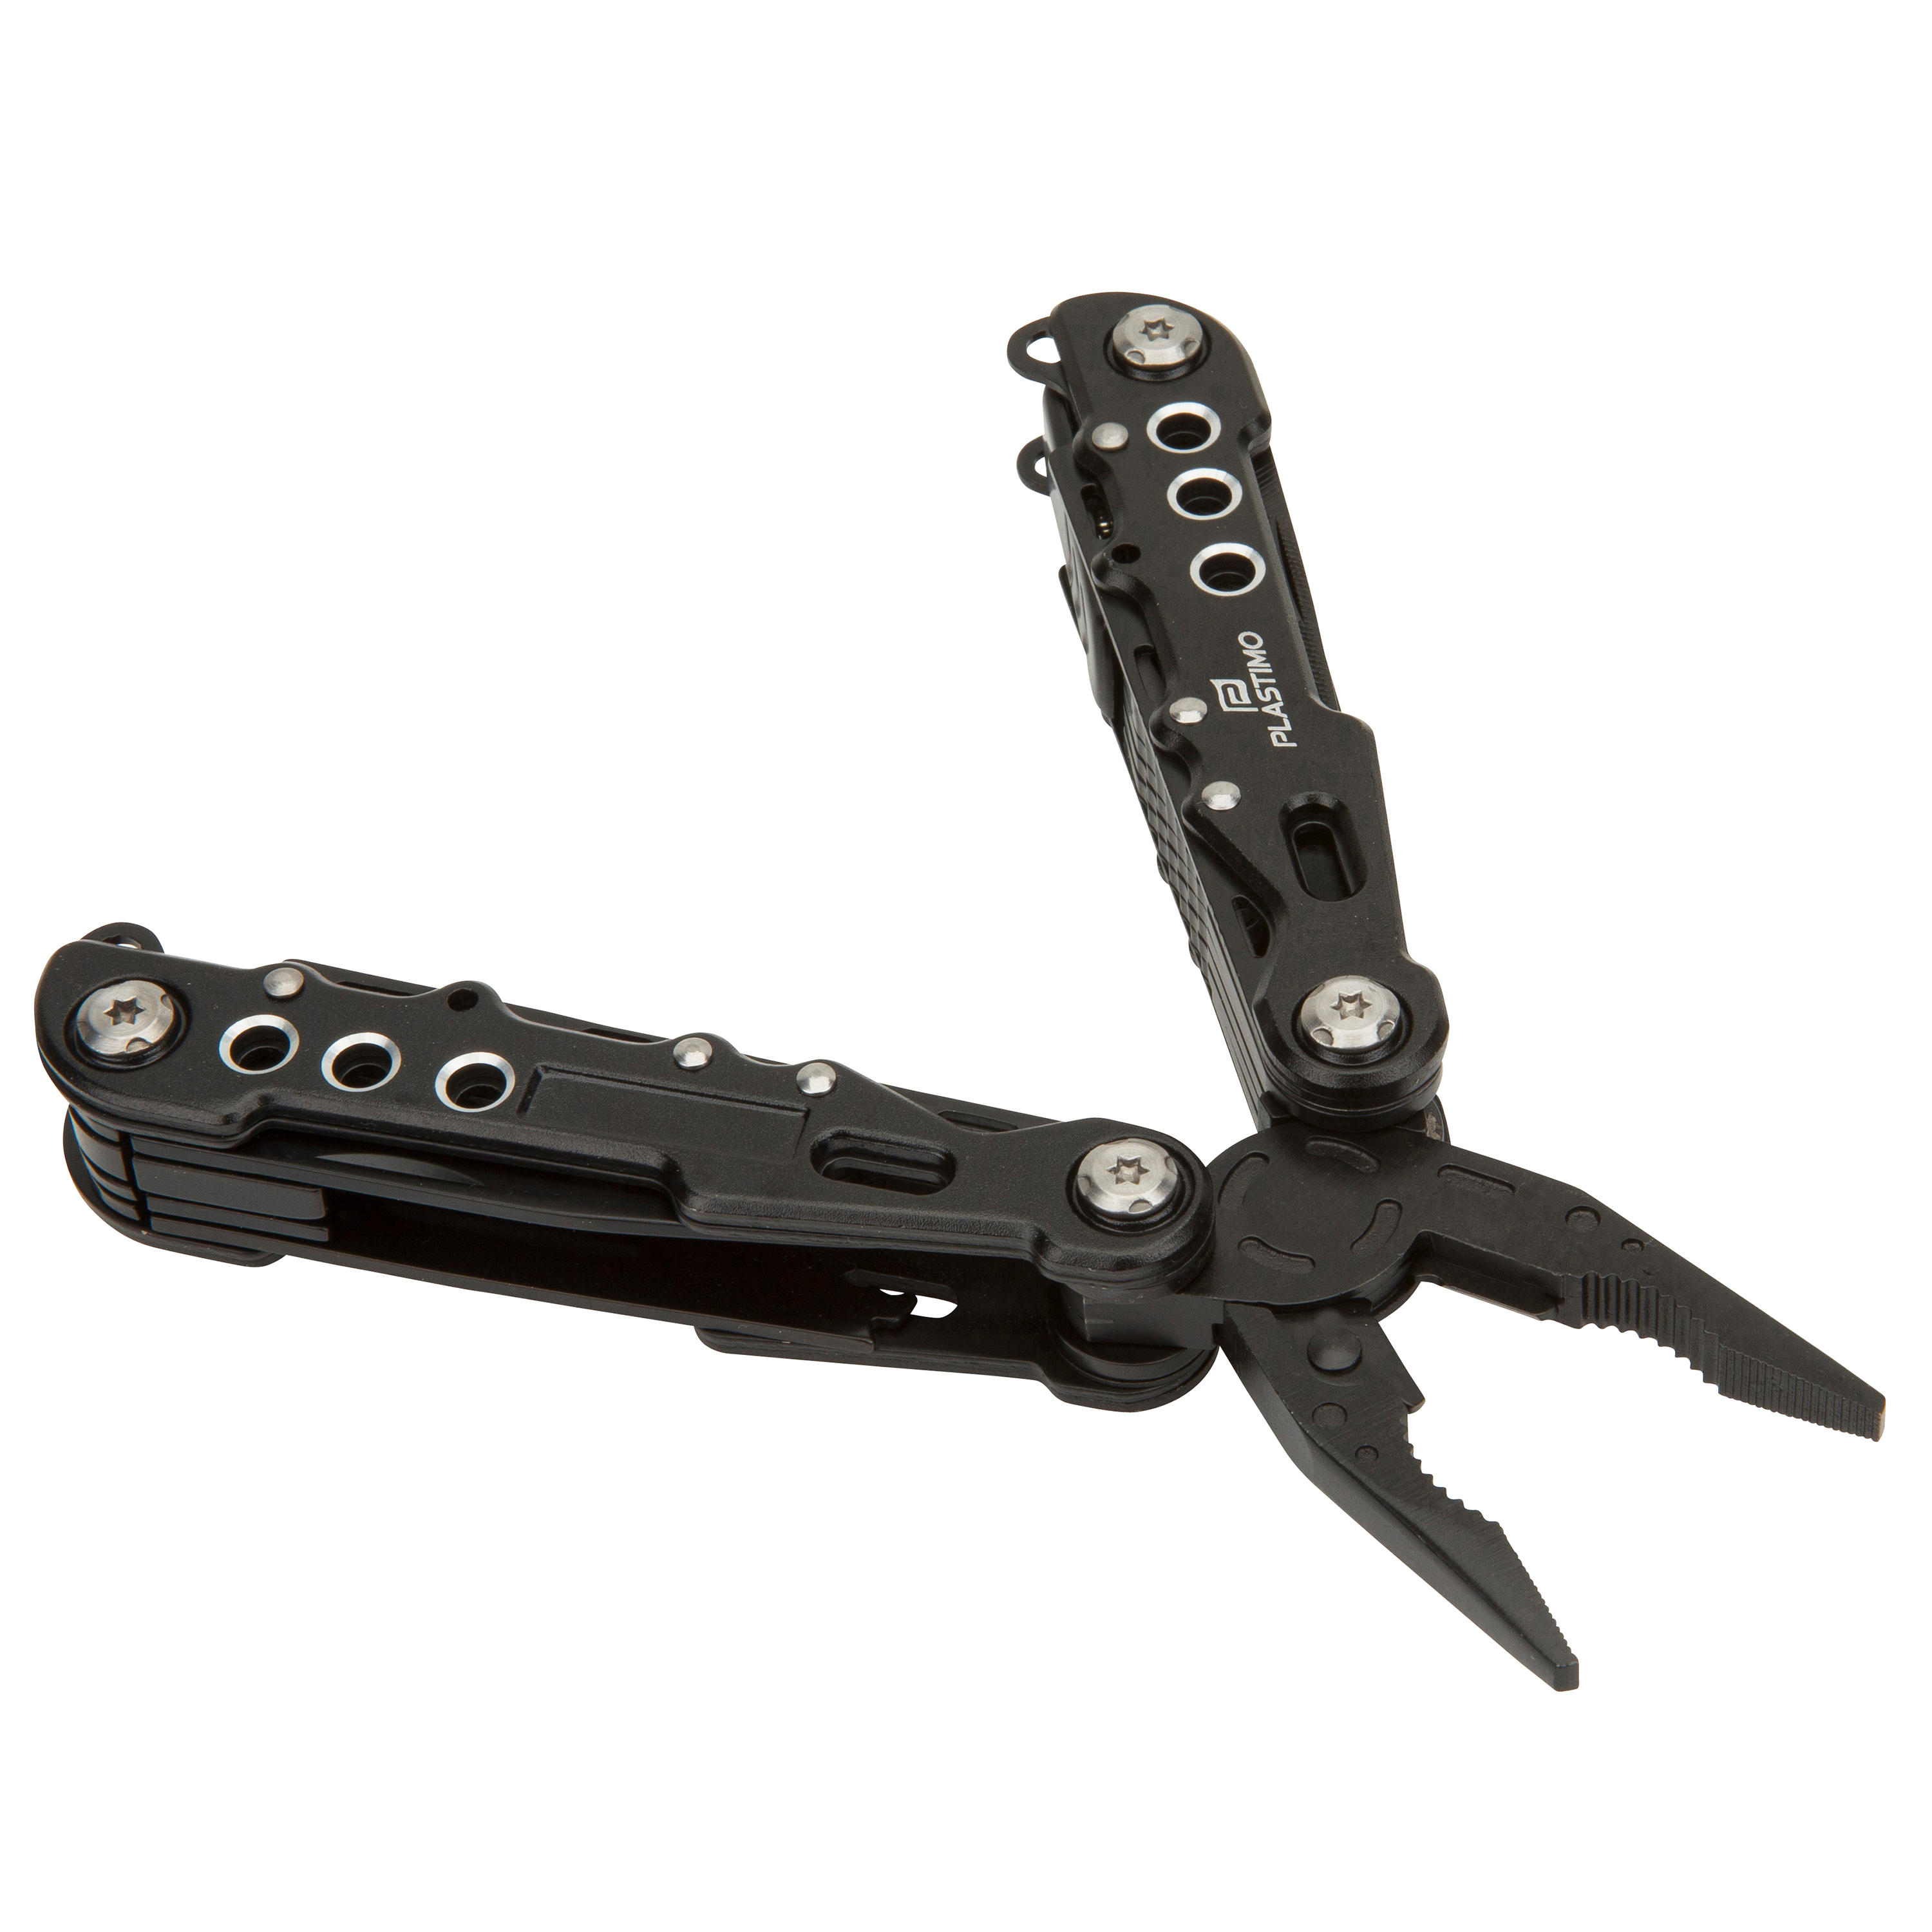 Multifunction 20-tool knife/pliers made from anodised aluminium with safety lock 3/4